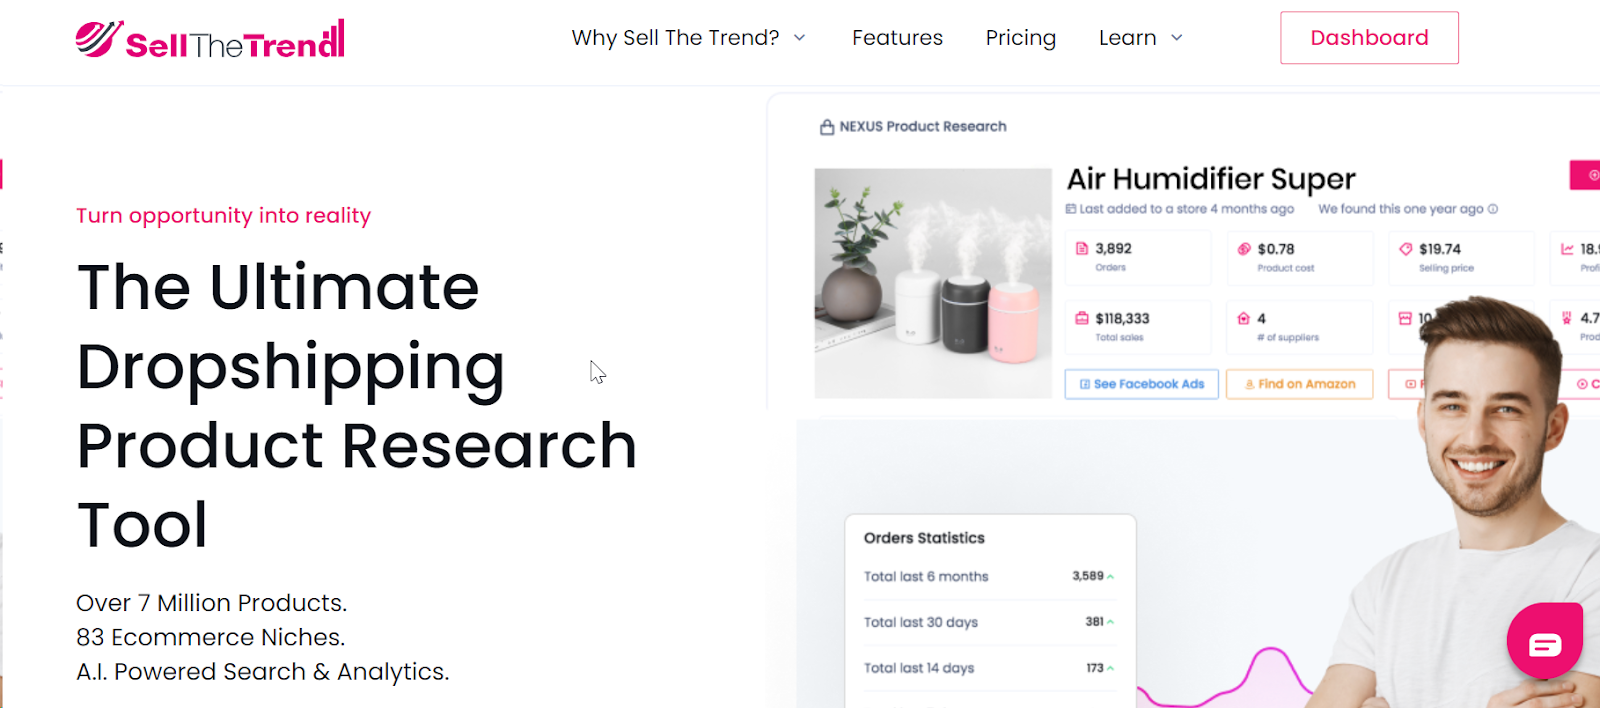 Sell the Trend: the ultimate dropshipping product research tool